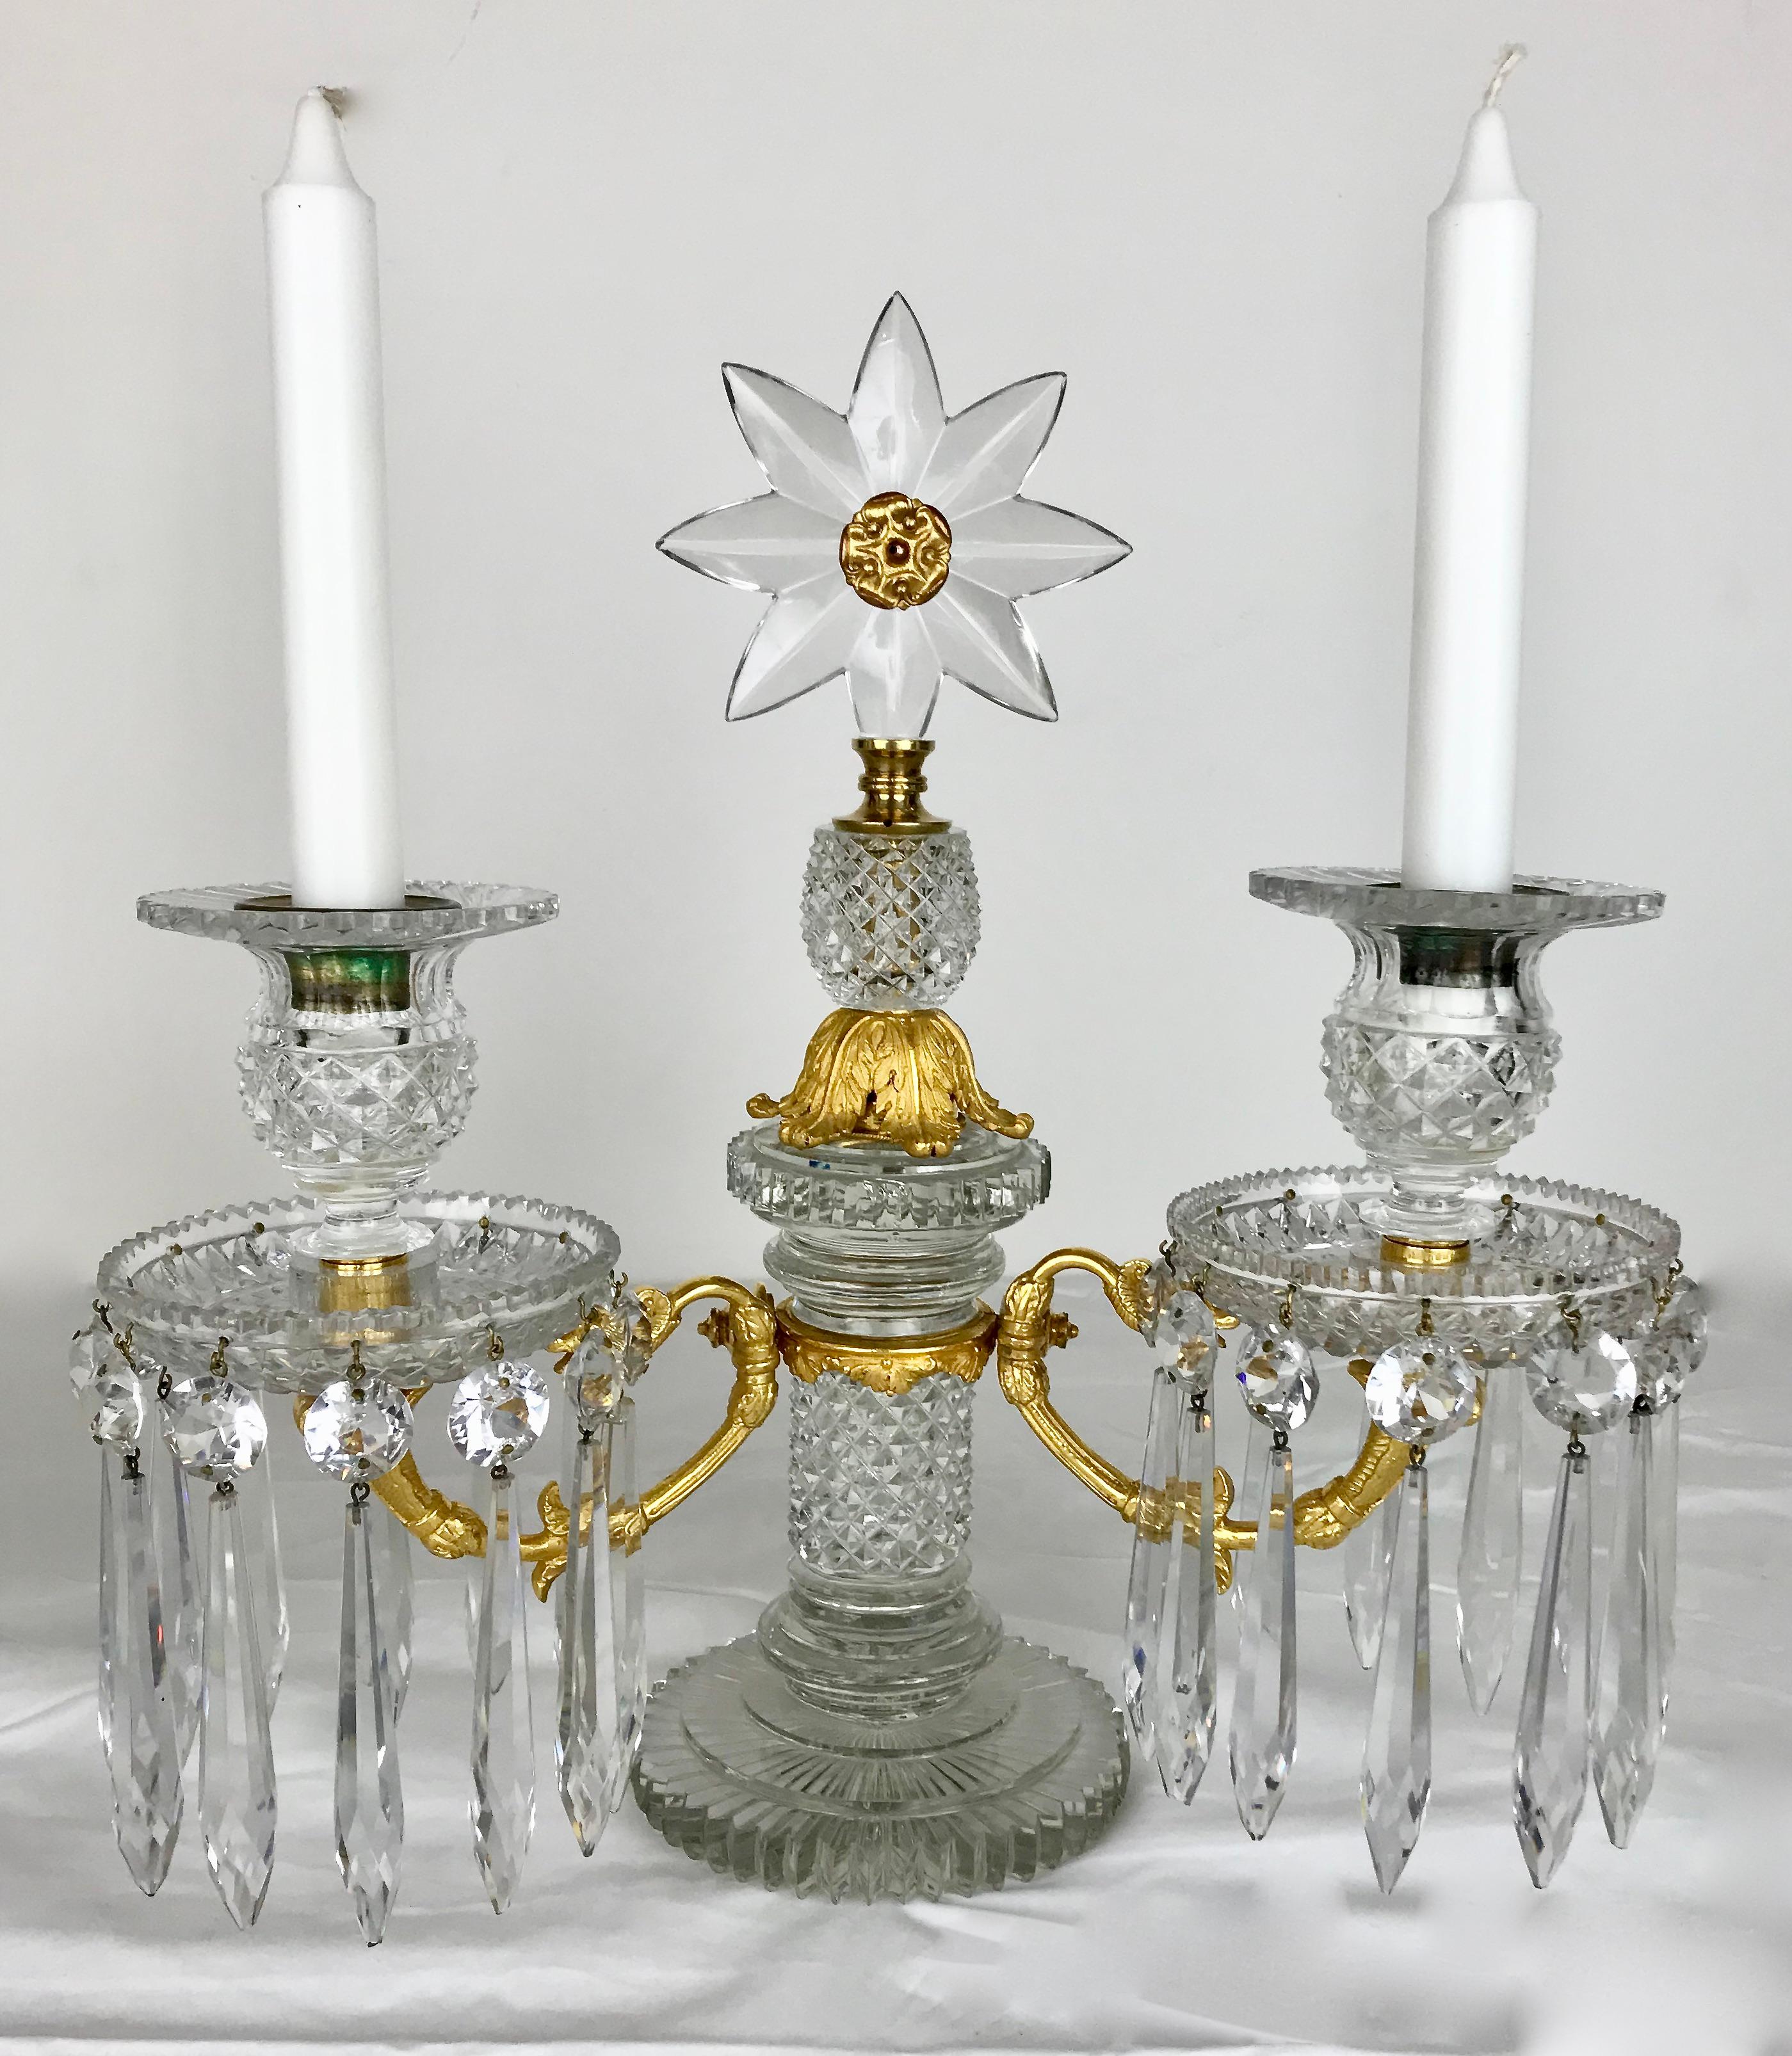 This exquisite pair of Regency two light candelabra are attributed to the renown maker Apsley Pellatt. The circular stepped bases with diamond cut columns support twin ormolu arms. The star form finials are mounted with ormolu rondels.